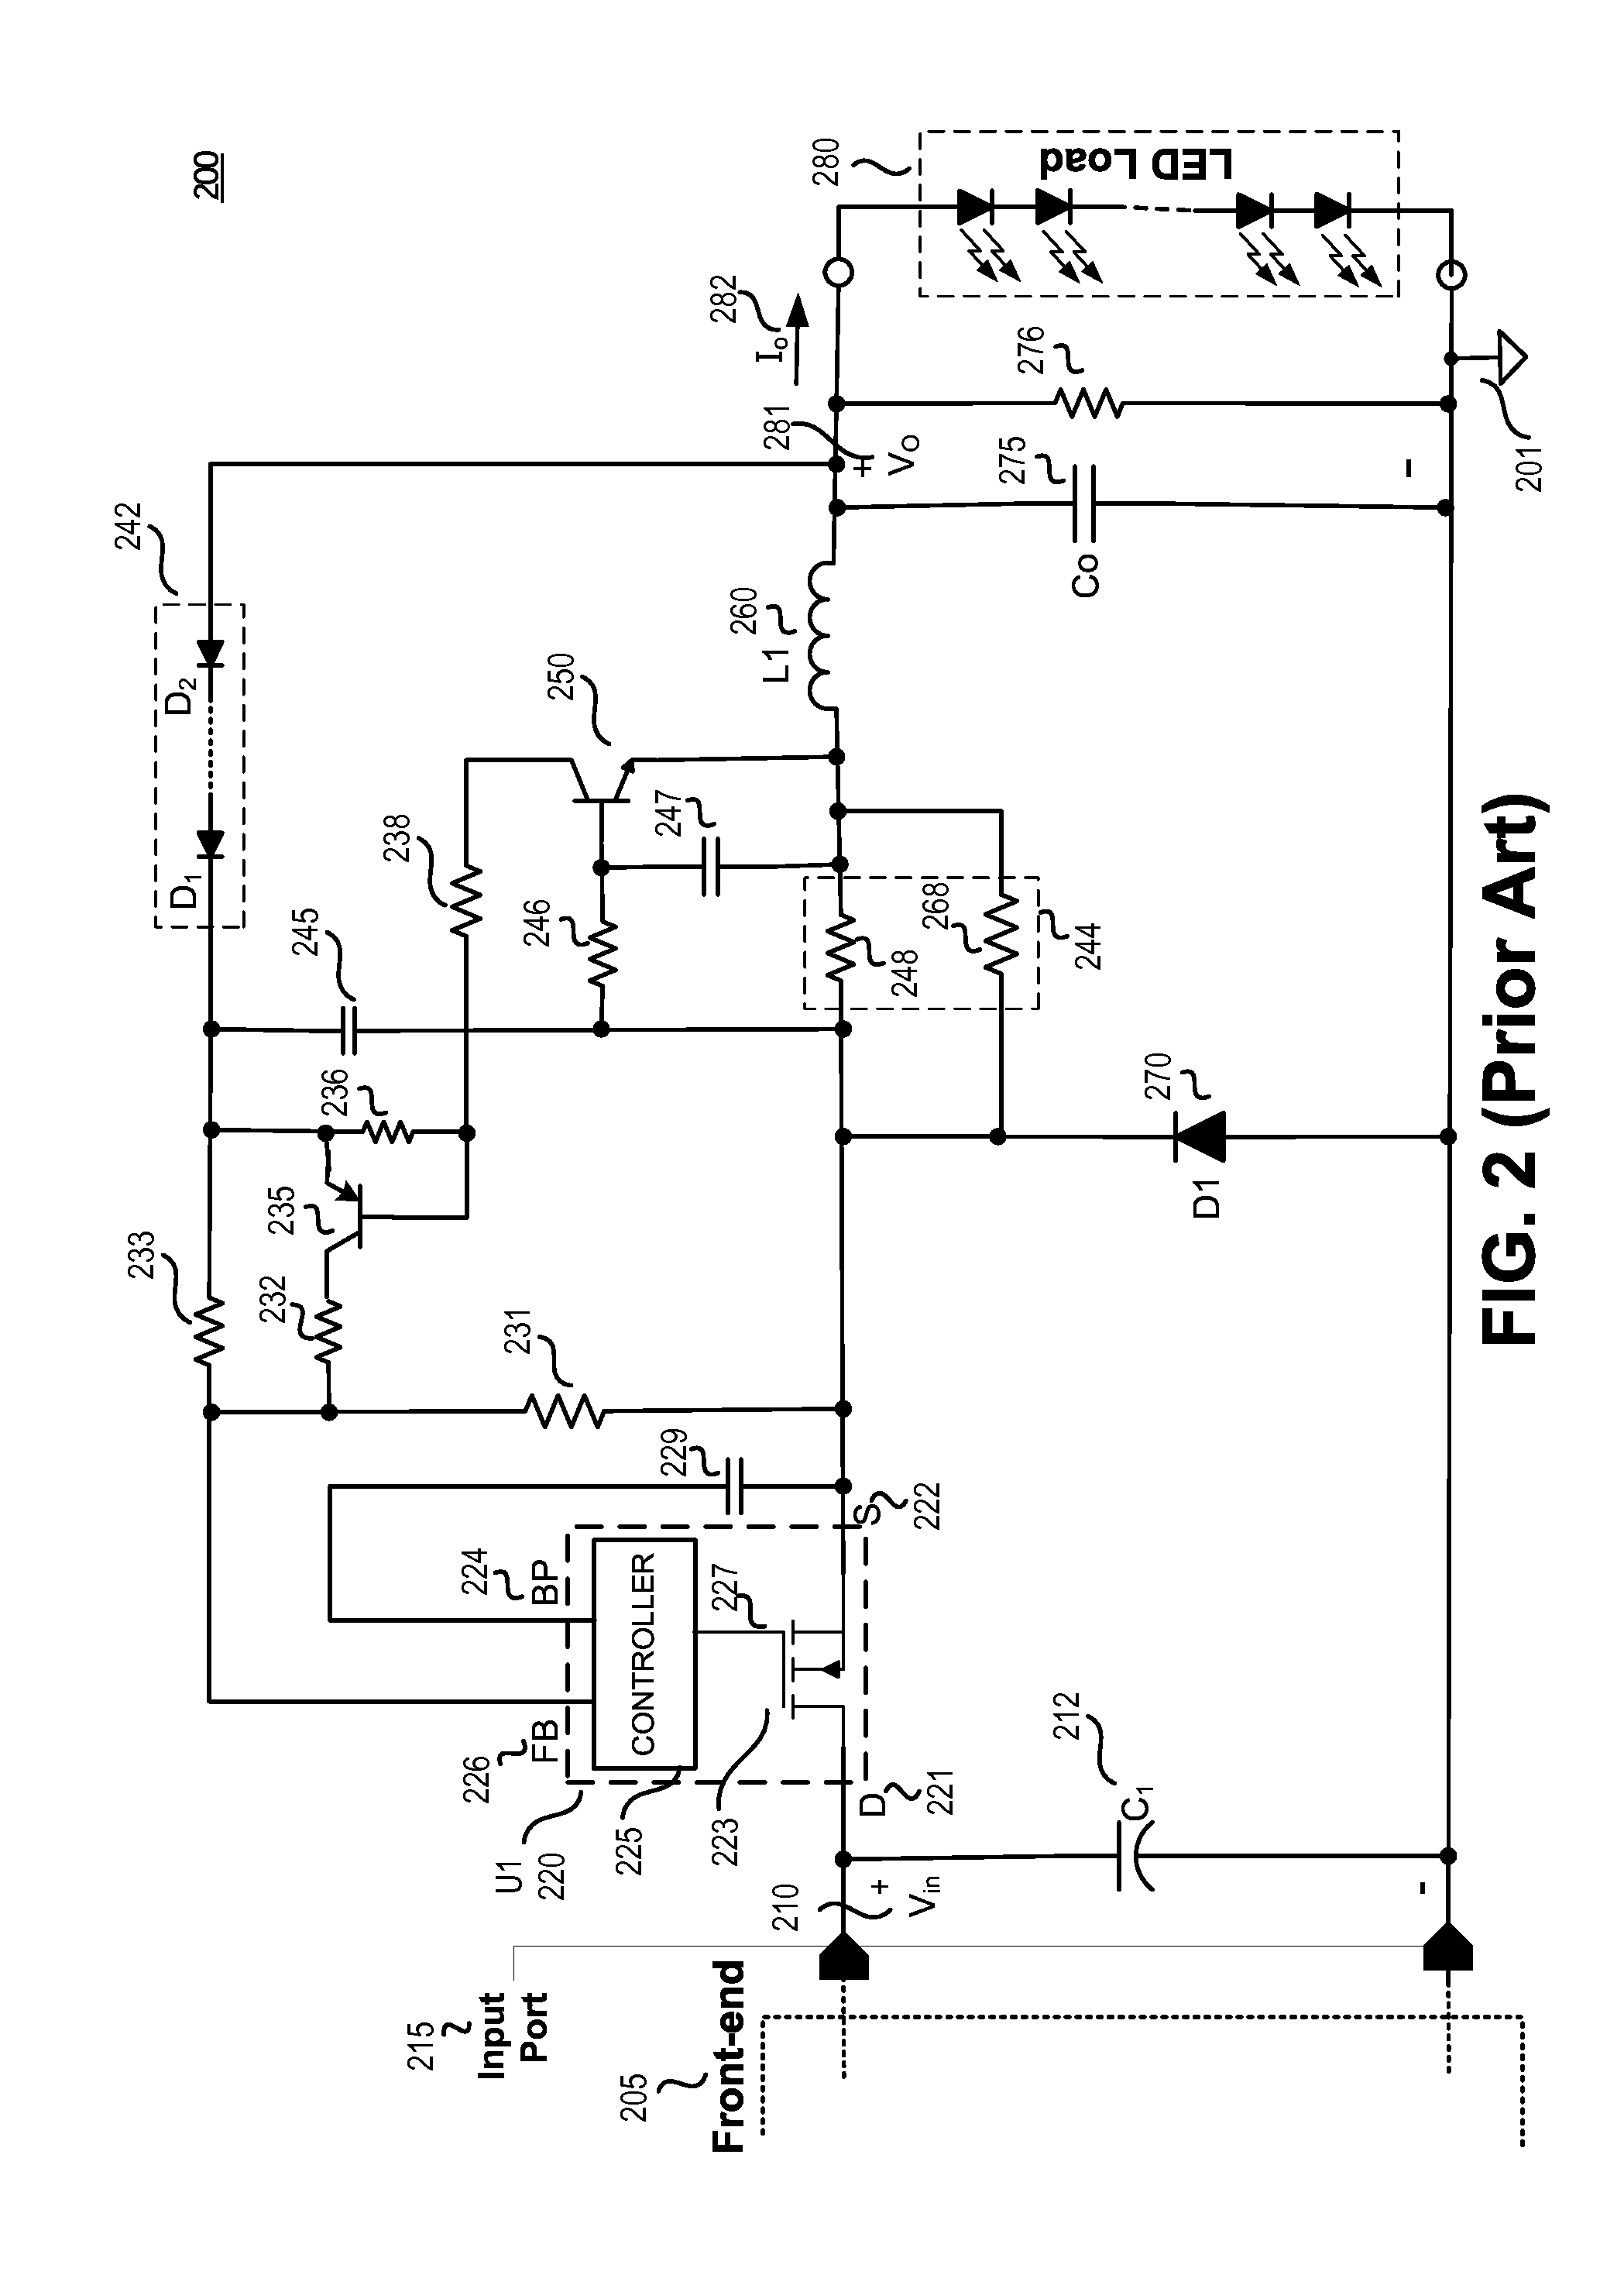 Simplified current sense for buck LED driver